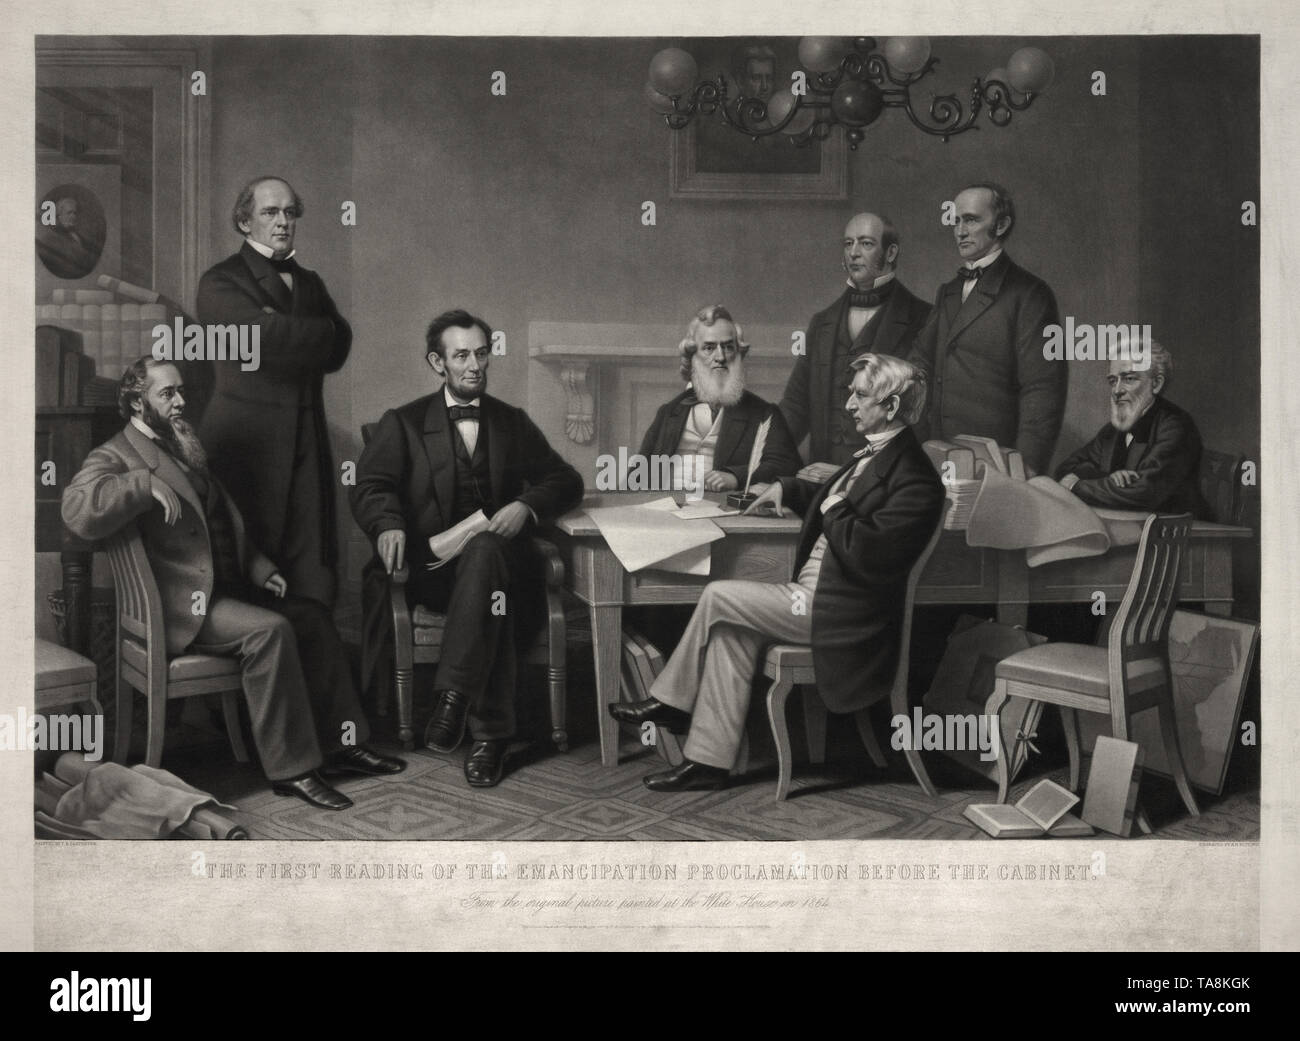 The First Reading of the Emancipation Proclamation before the Cabinet, Stock Photo